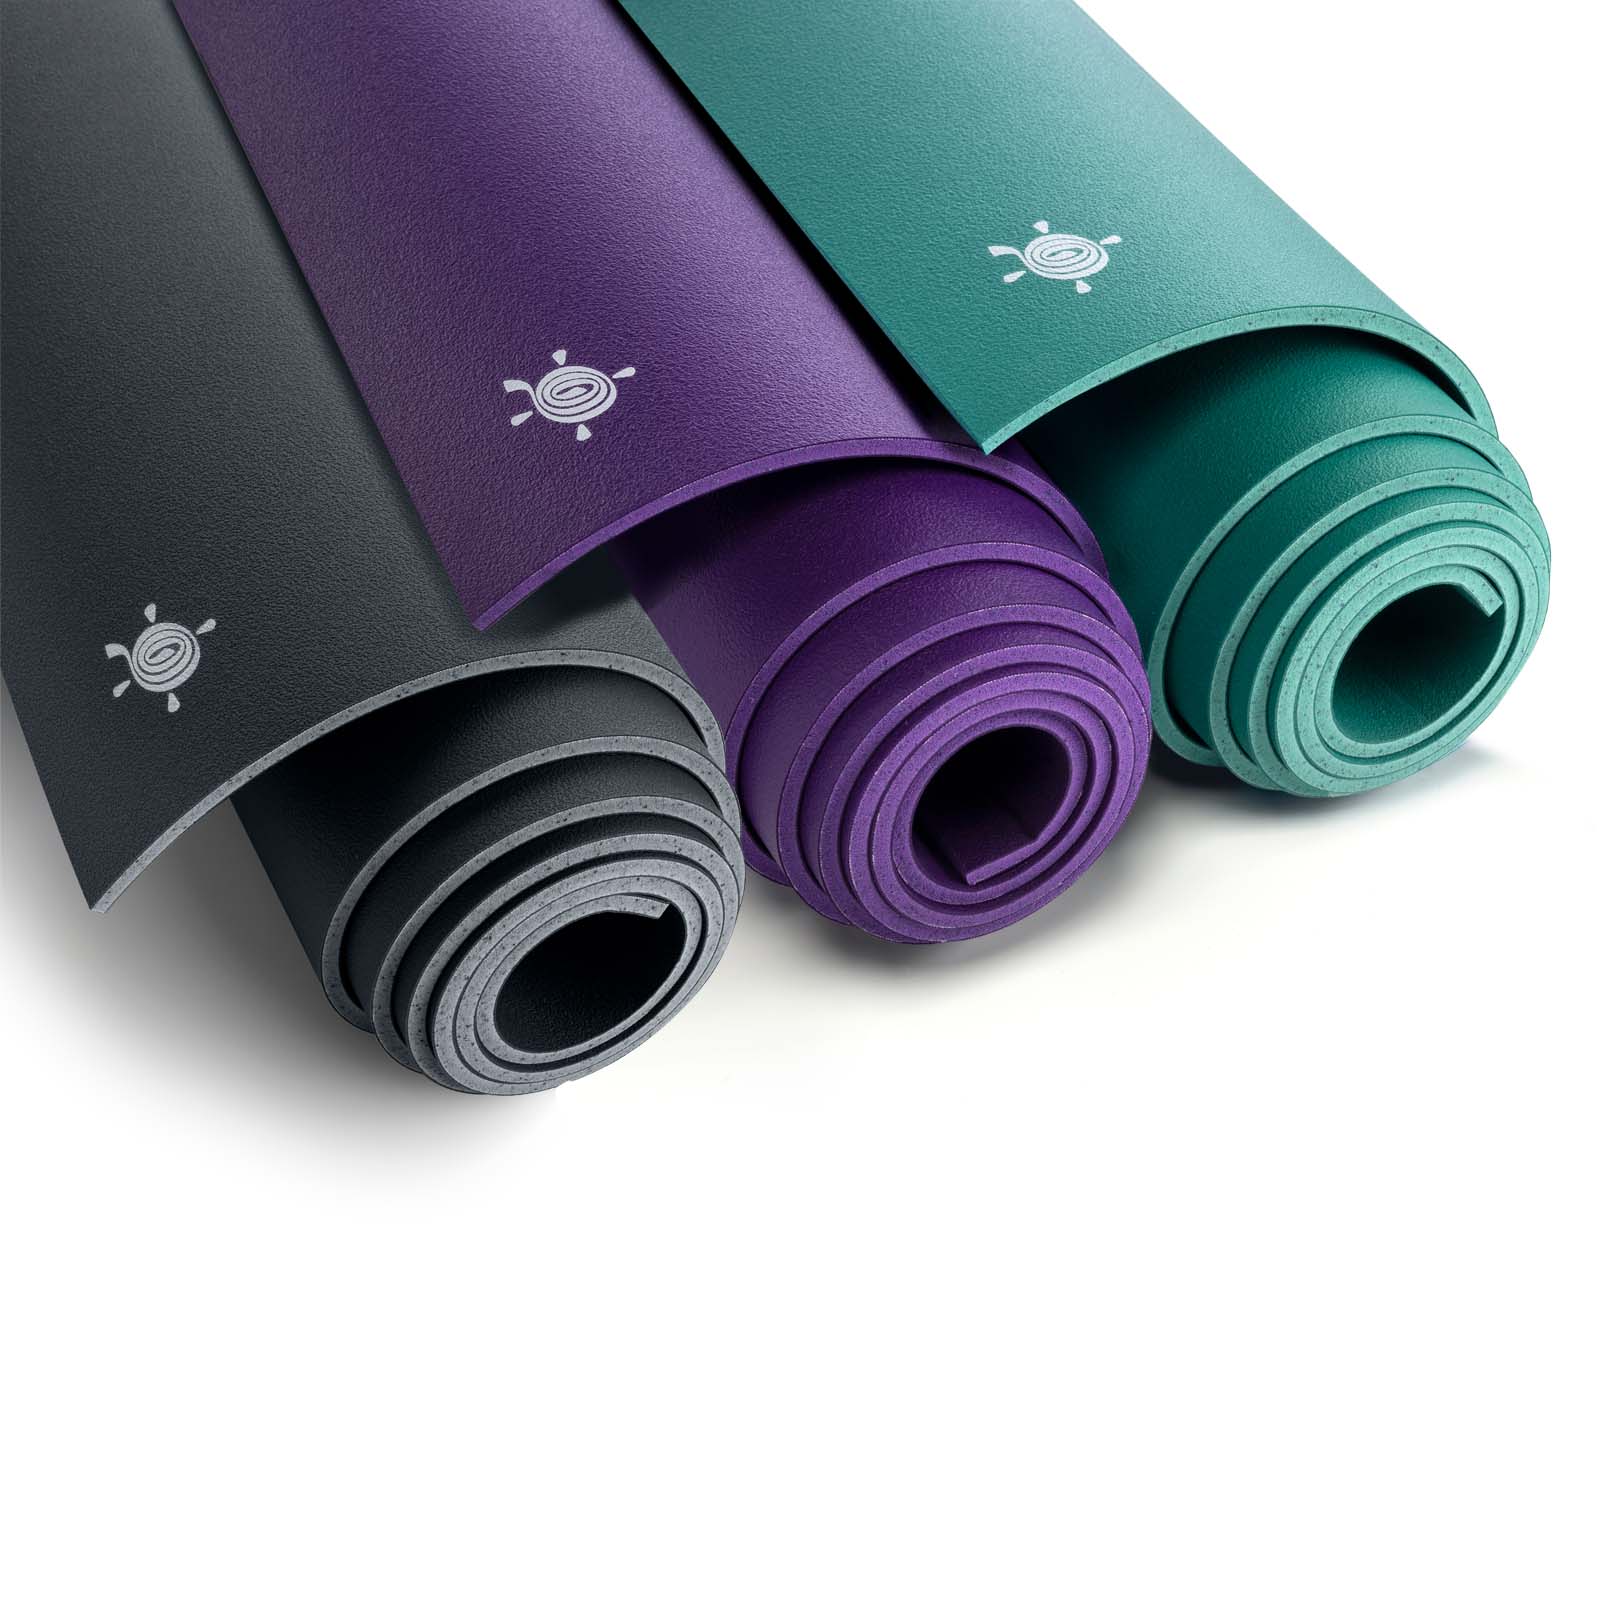 kurma geco series yoga mats group shot, with colors anthracite, bloom and lagoon